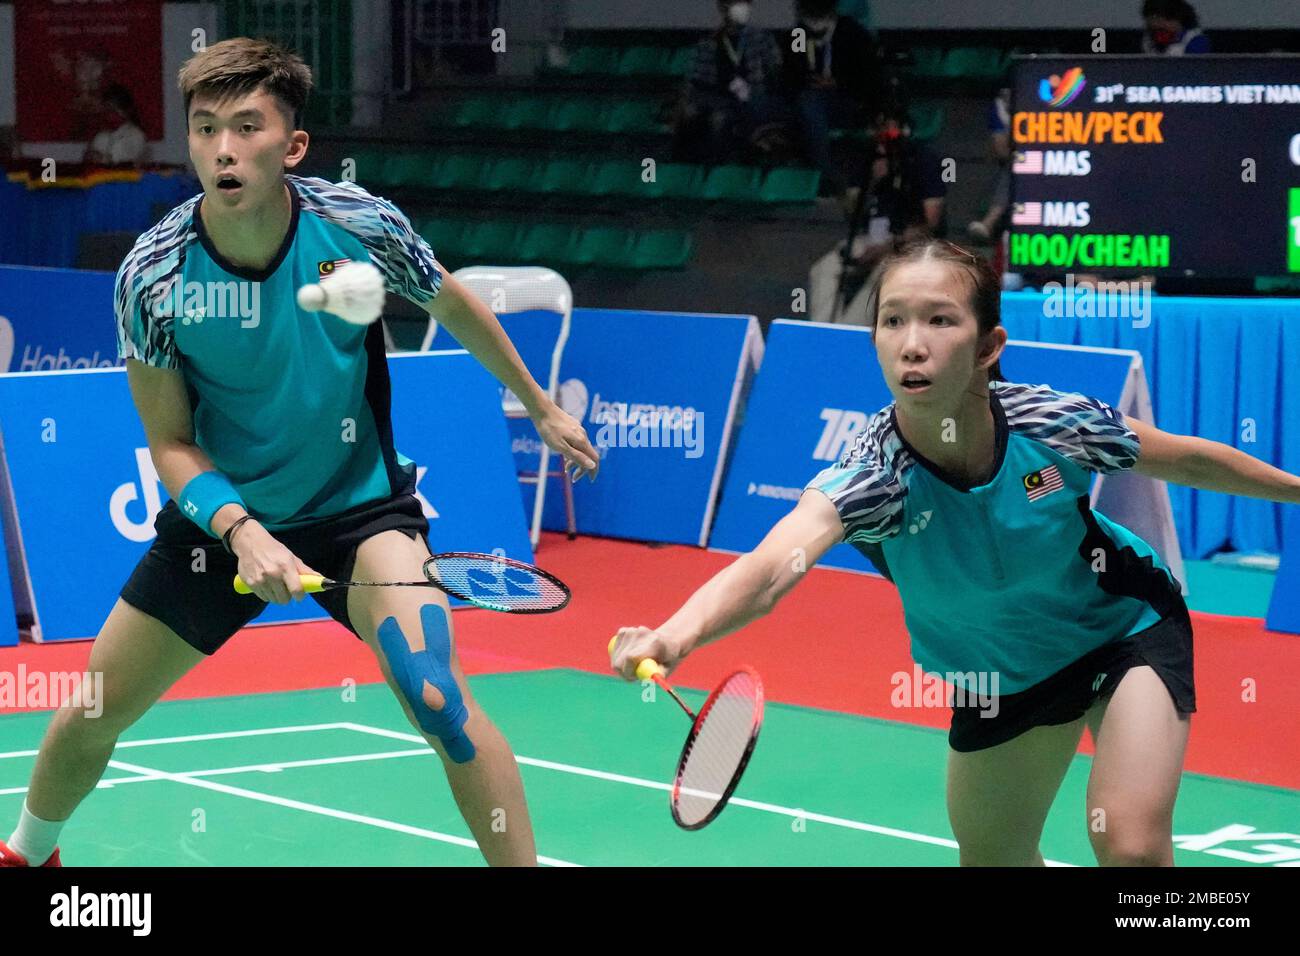 Malaysias Hoo Pang Ron and Cheah Yee See, right, compete against their compatriots Chen Tang Jie and Peck Yen Wei during their mixed doubles badminton final match at the 31st Southeast Asian